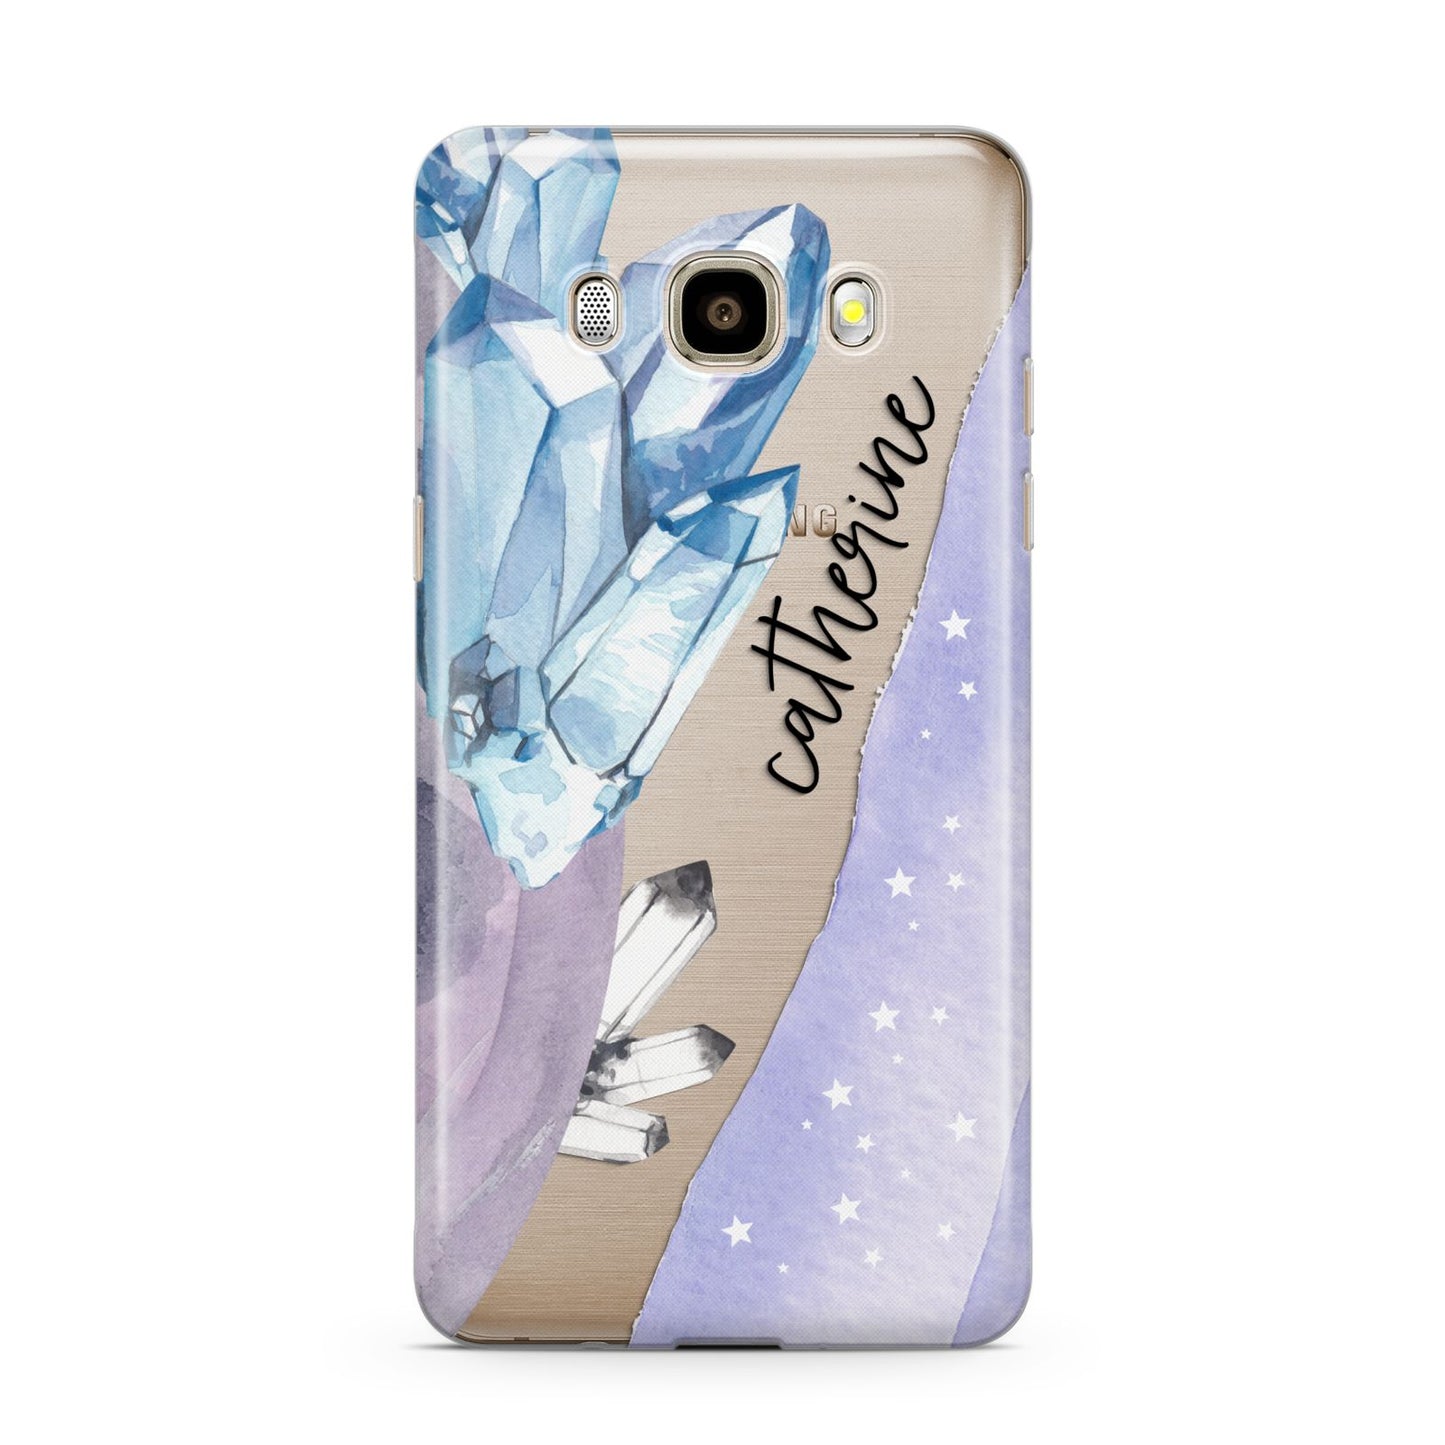 Crystals Personalised Name Samsung Galaxy J7 2016 Case on gold phone